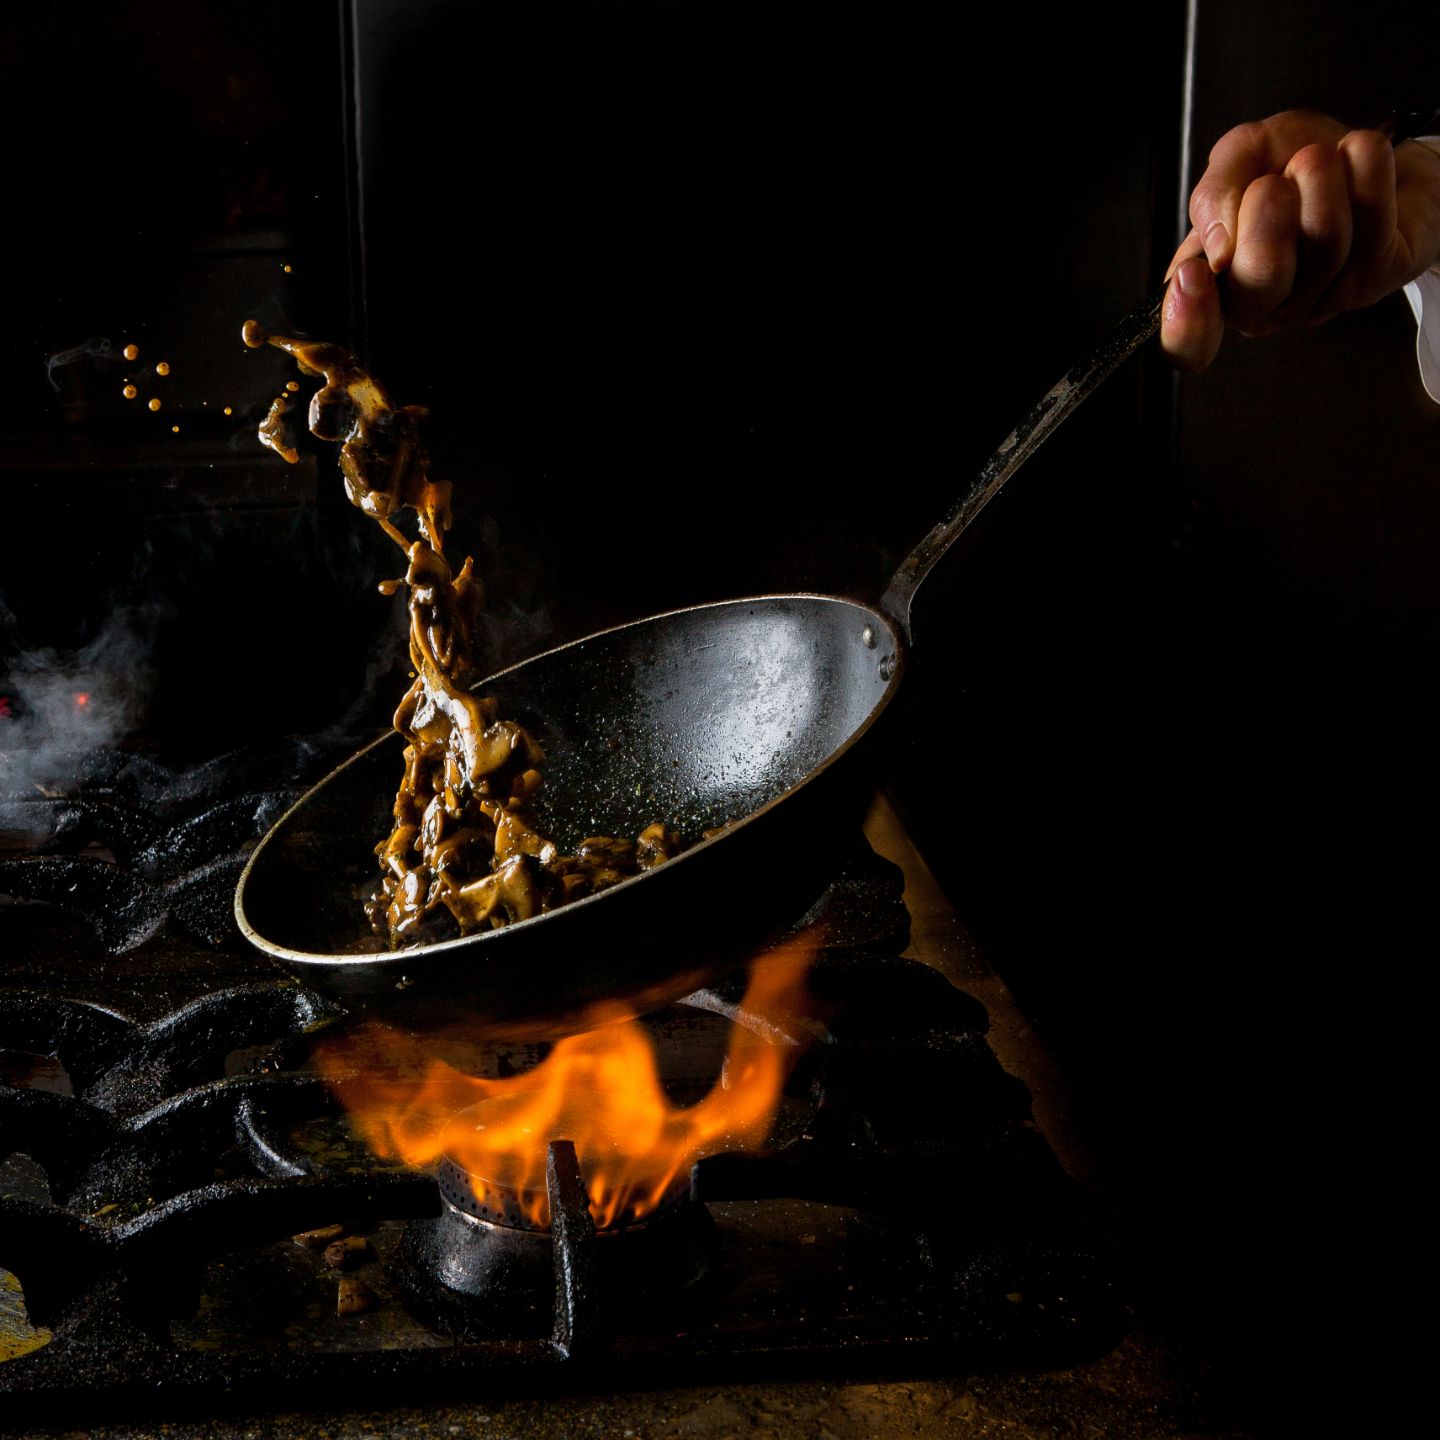 side-view-mushroom-frying-with-gas-stove-fire-human-hand-pan